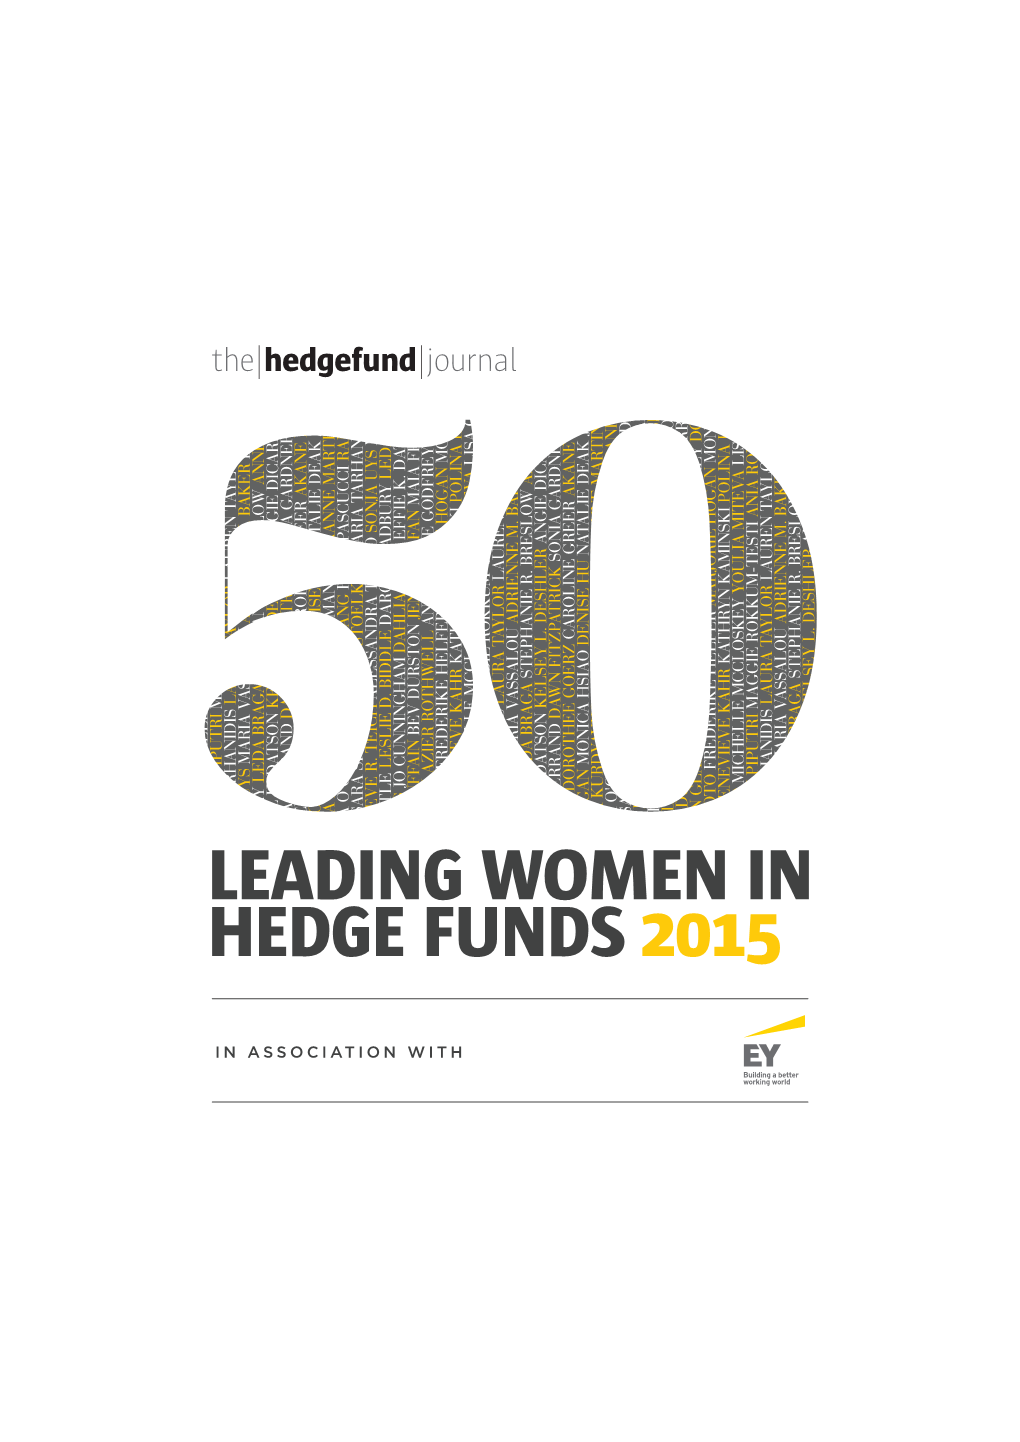 Leading Women in Hedge Funds 2015